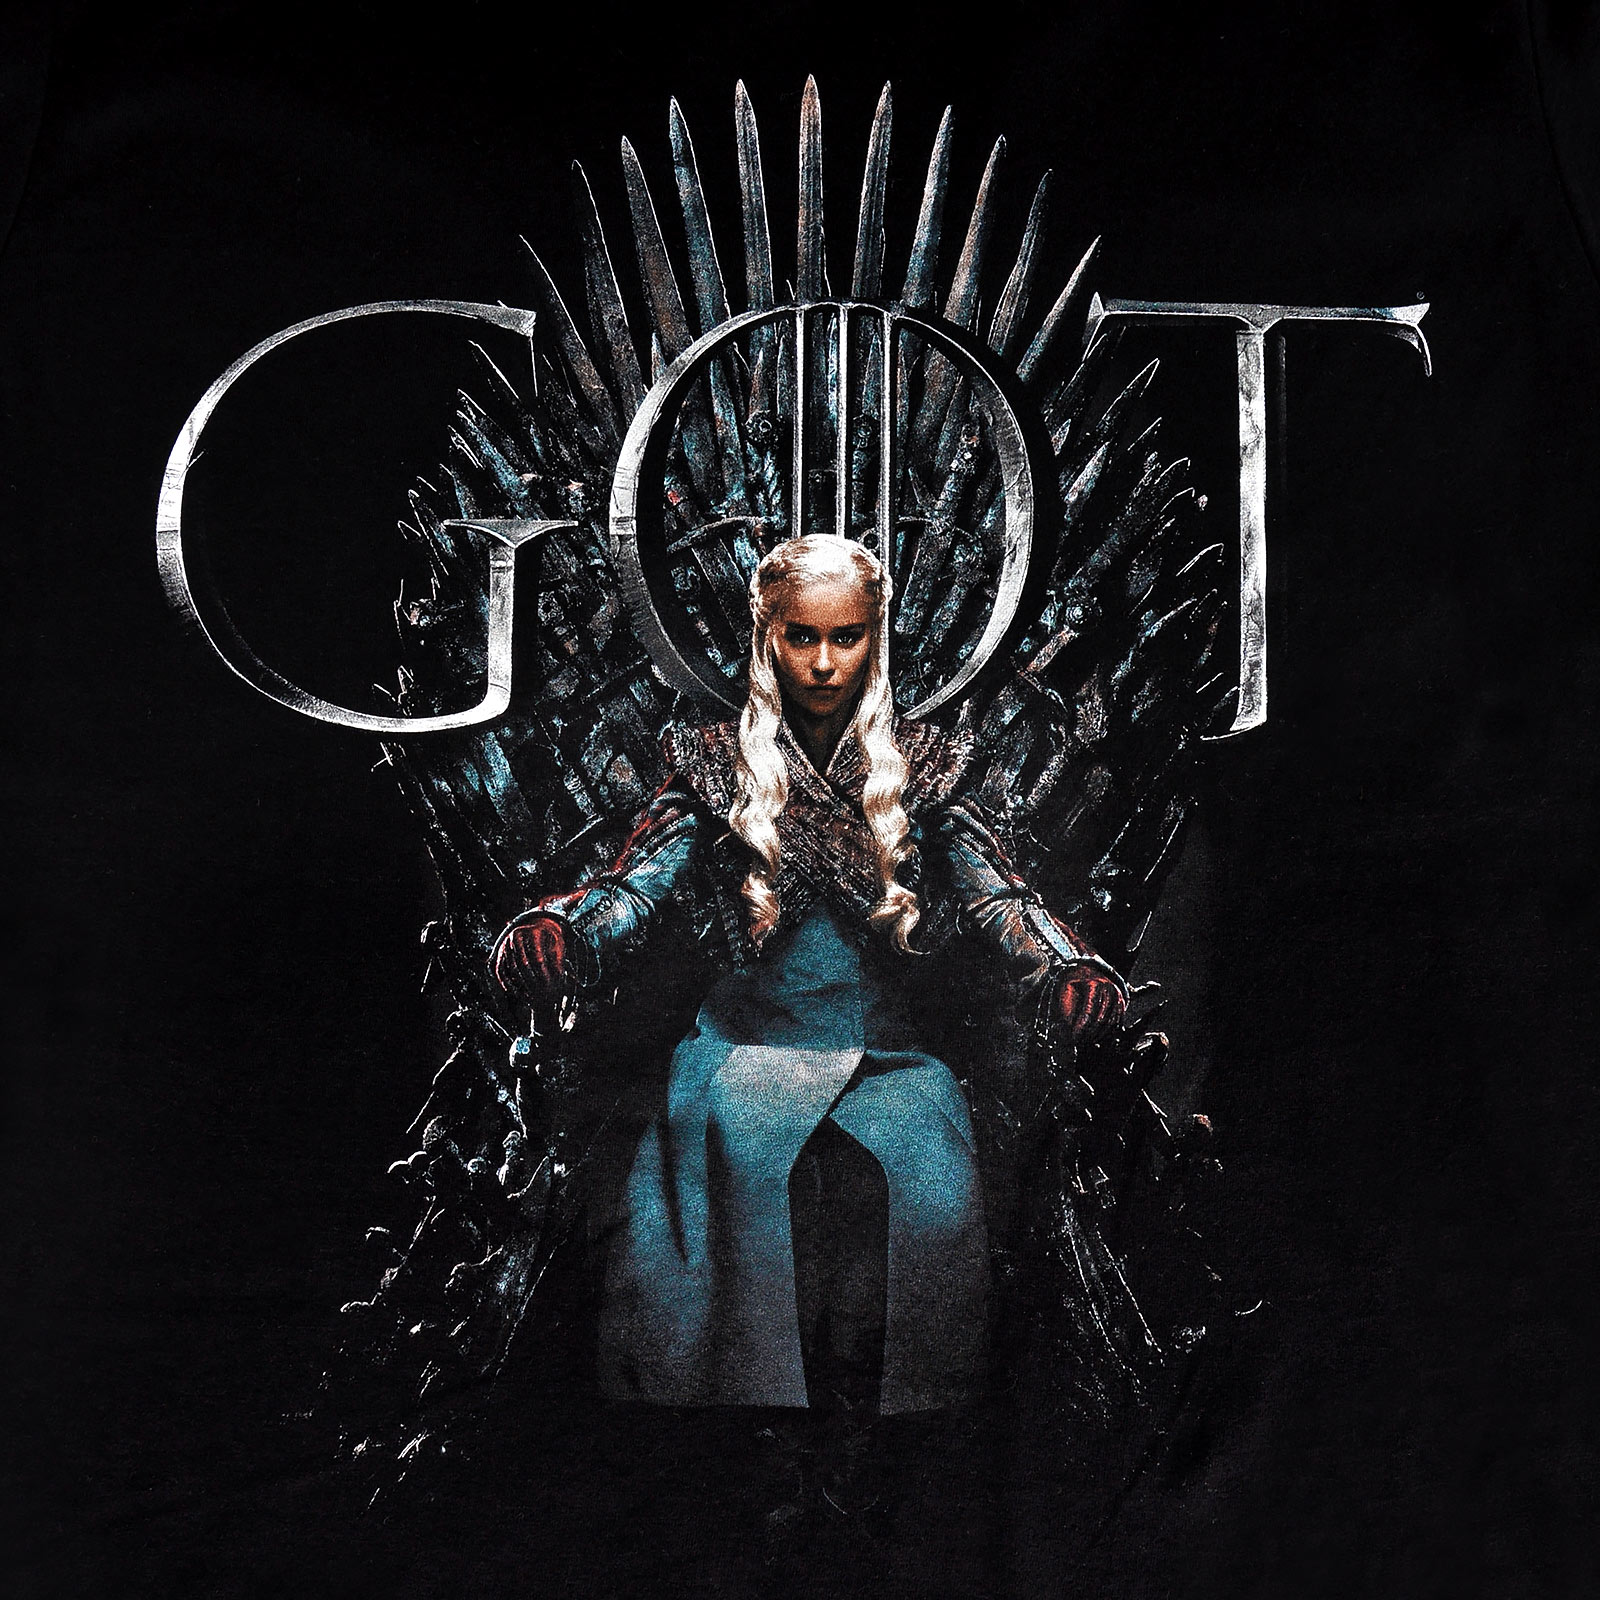 Game of Thrones - Daenerys For The Throne T-Shirt black